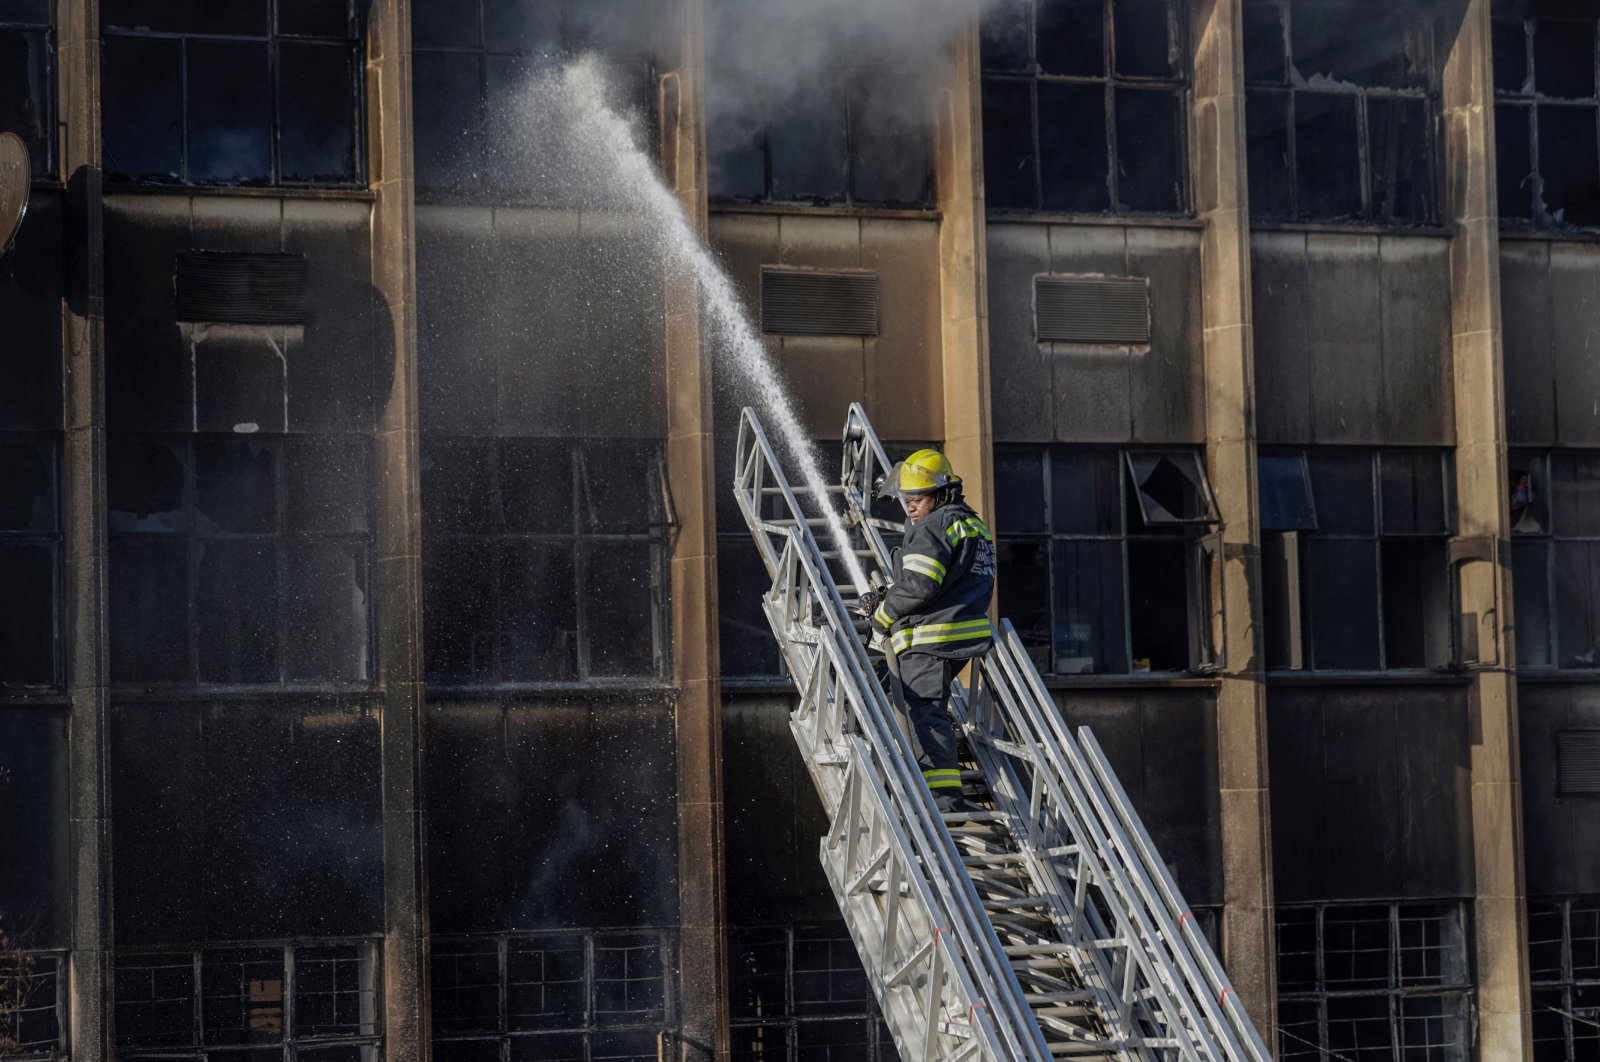 At least 7 children among 73 killed in Johannesburg building fire